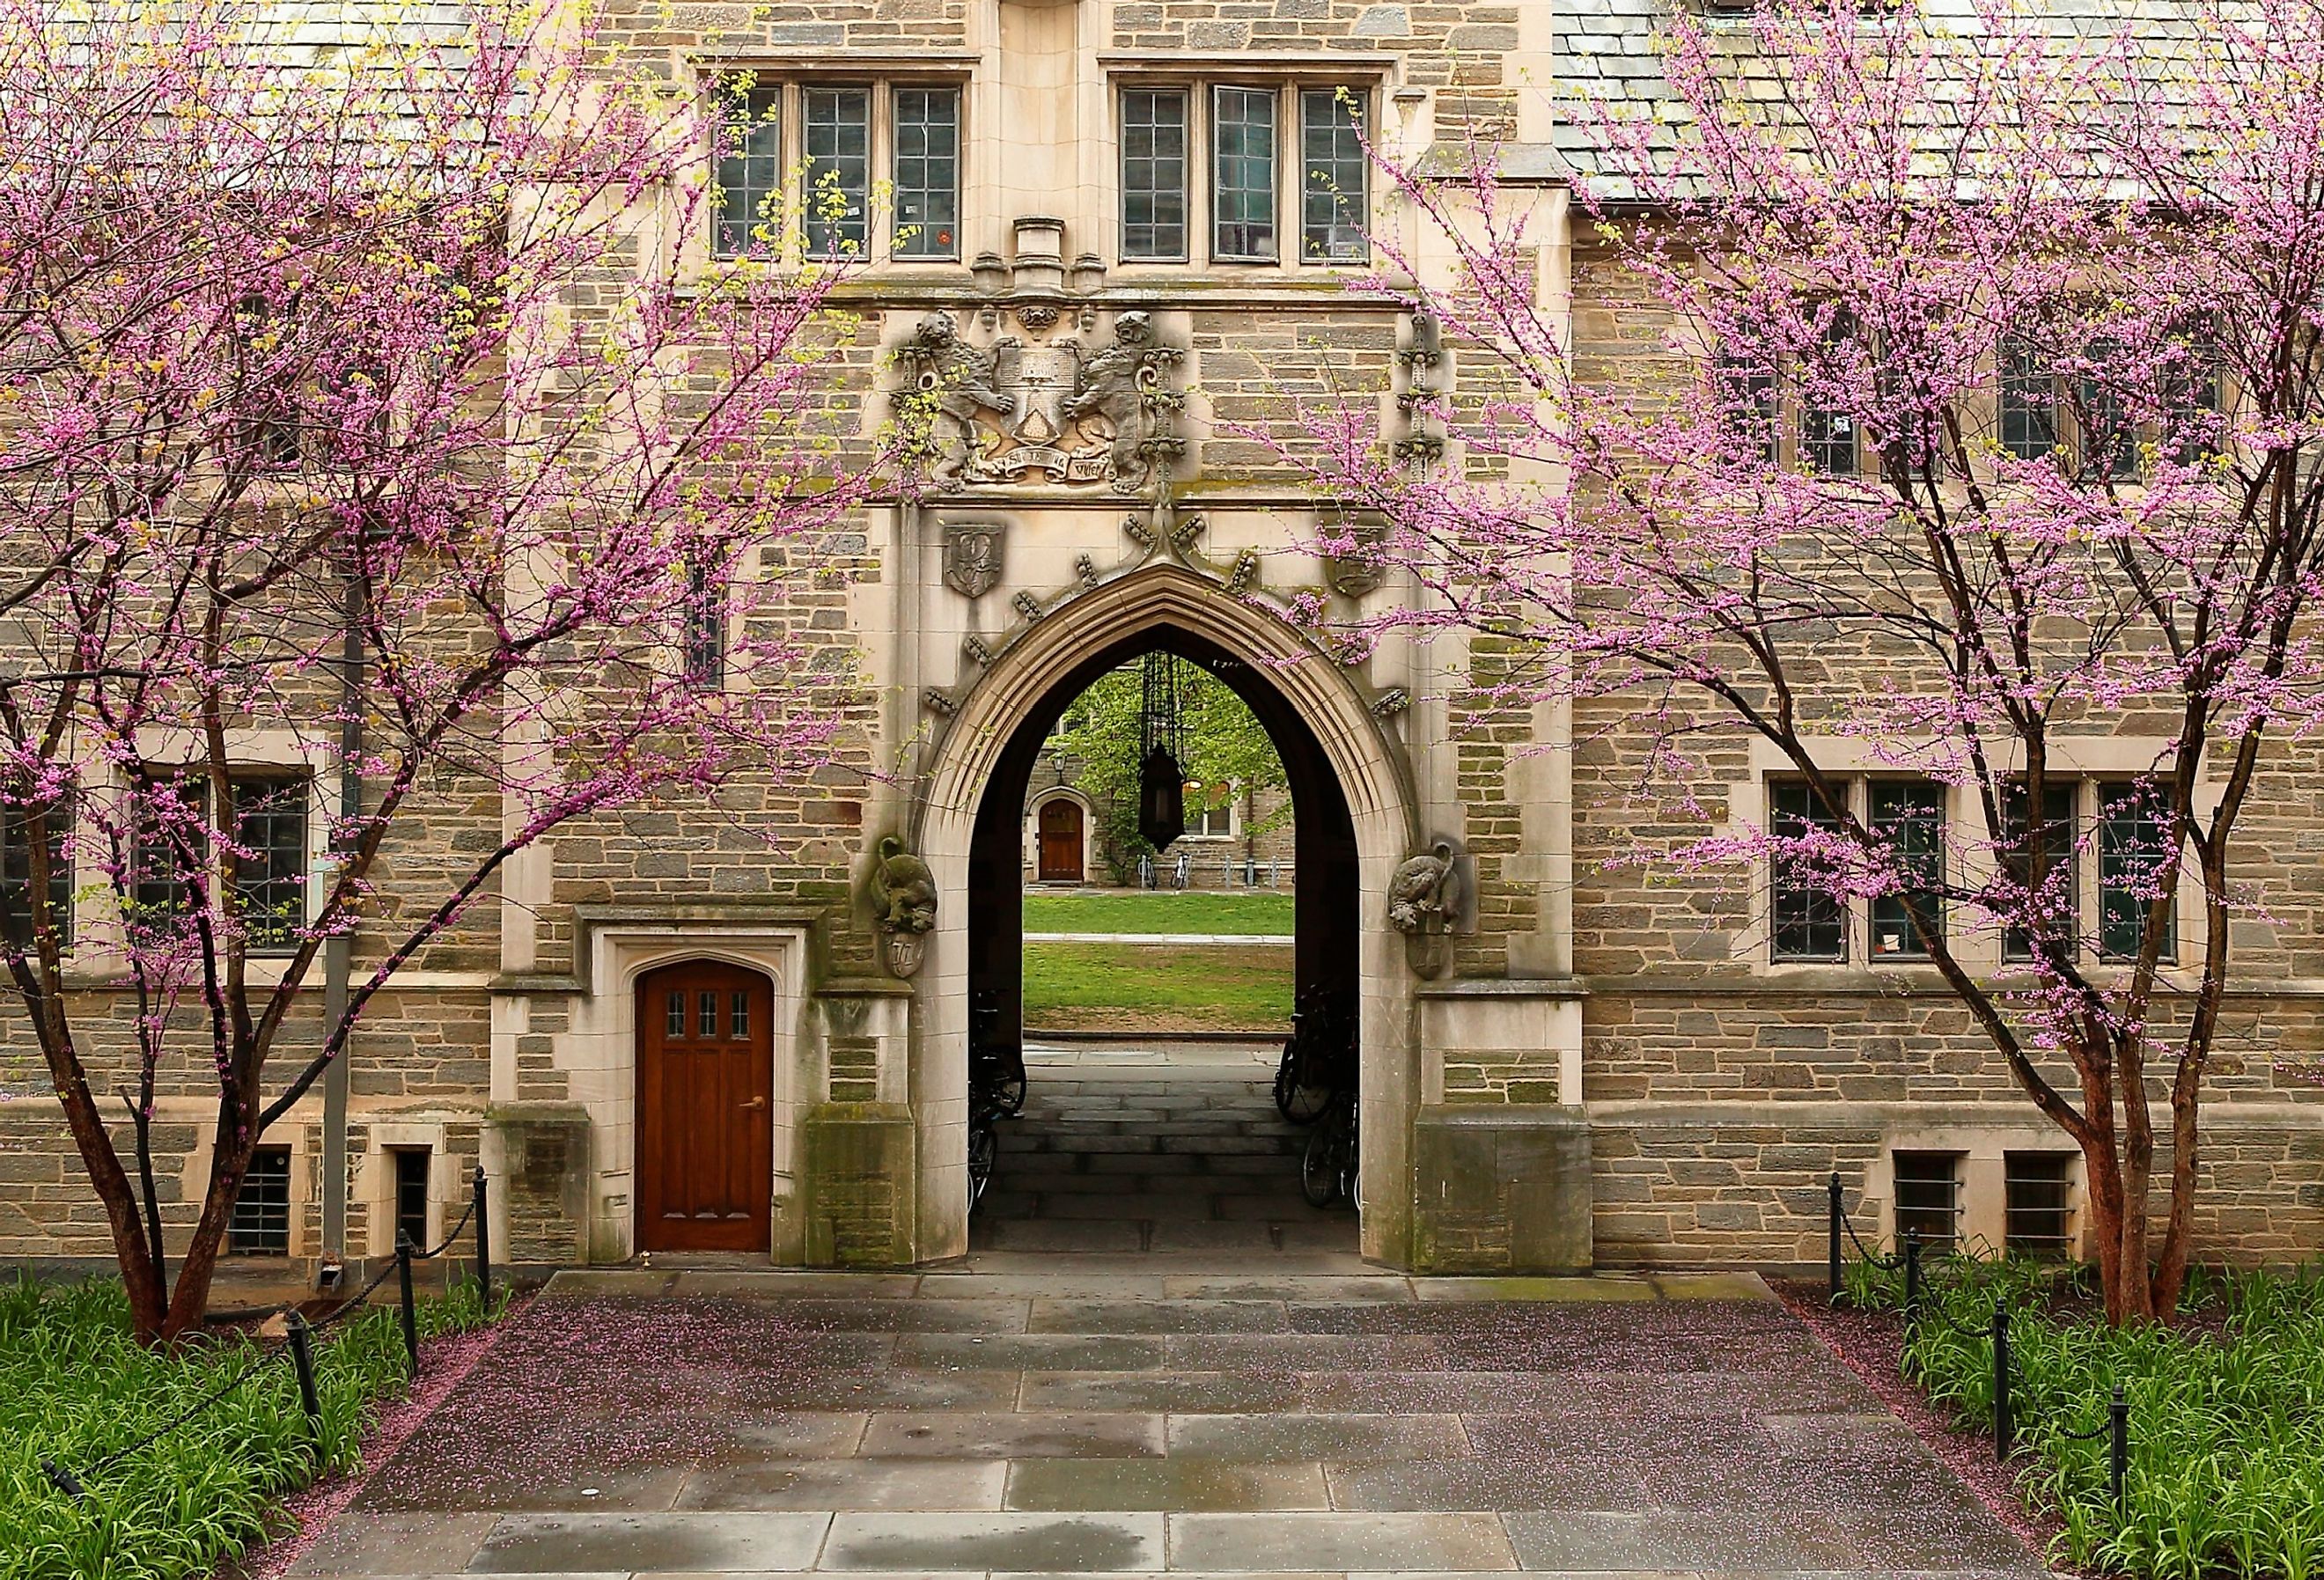 Exterior of Princeton campus building in Princeton, New Jersey. Image credit Jay Yuan via Shutterstock.